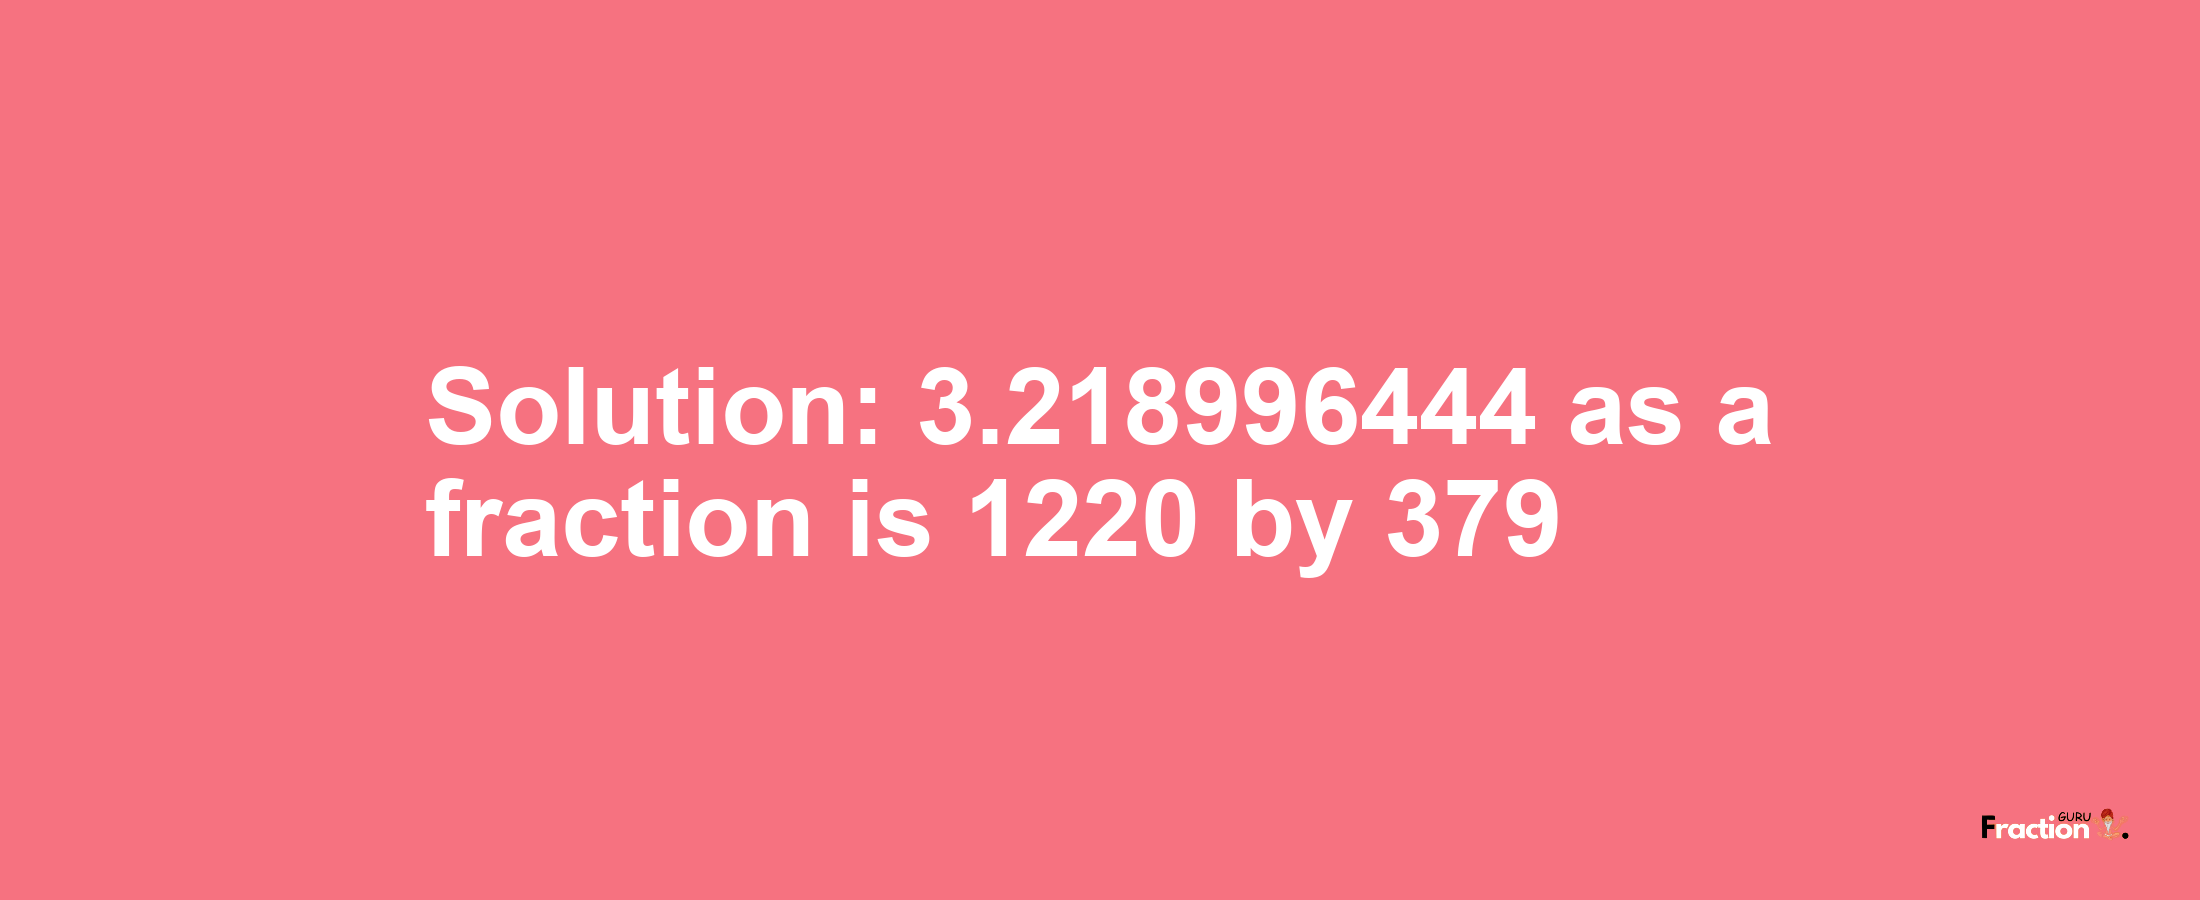 Solution:3.218996444 as a fraction is 1220/379